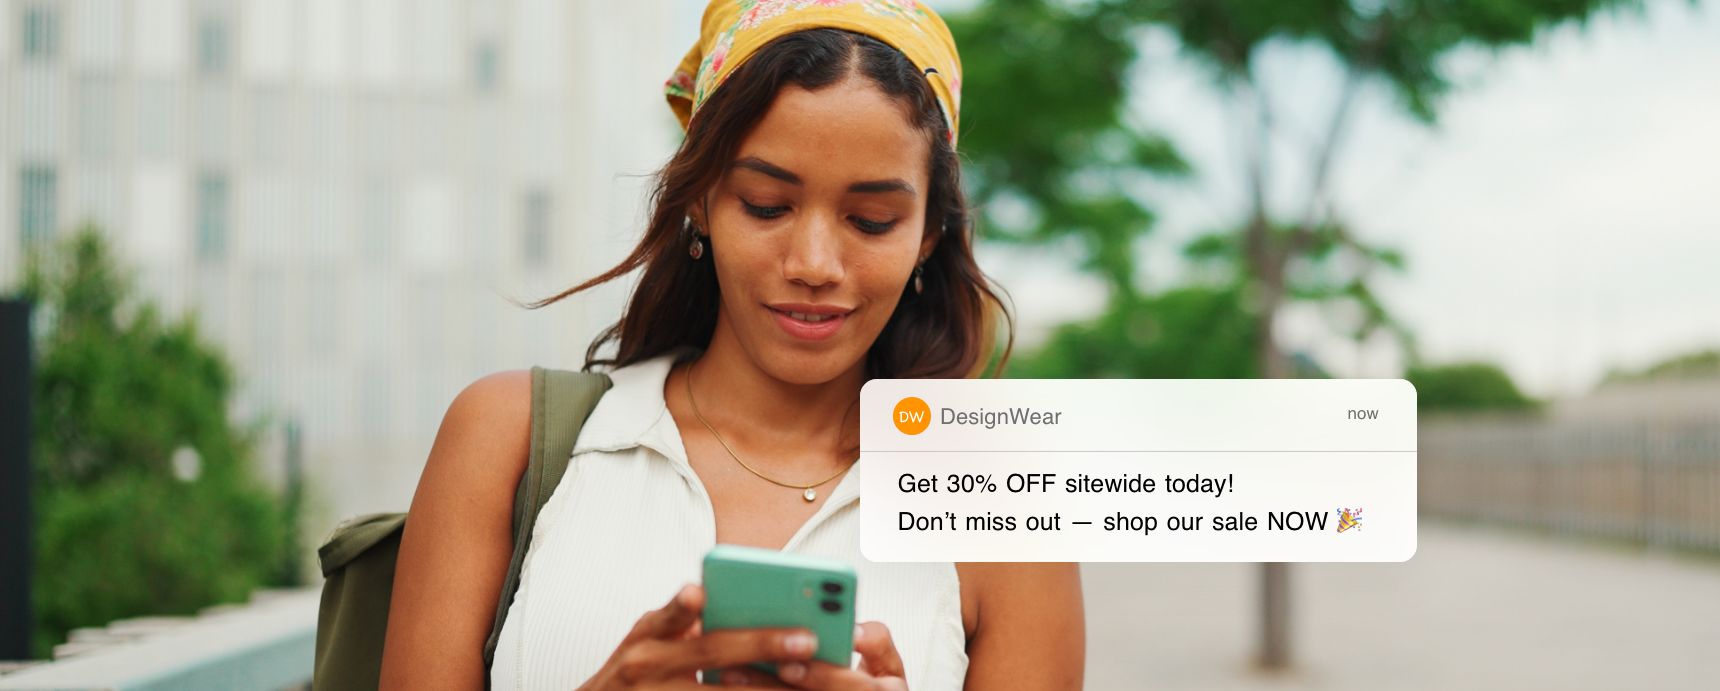 A mobile phone user getting a push notification about a 24-hour sale